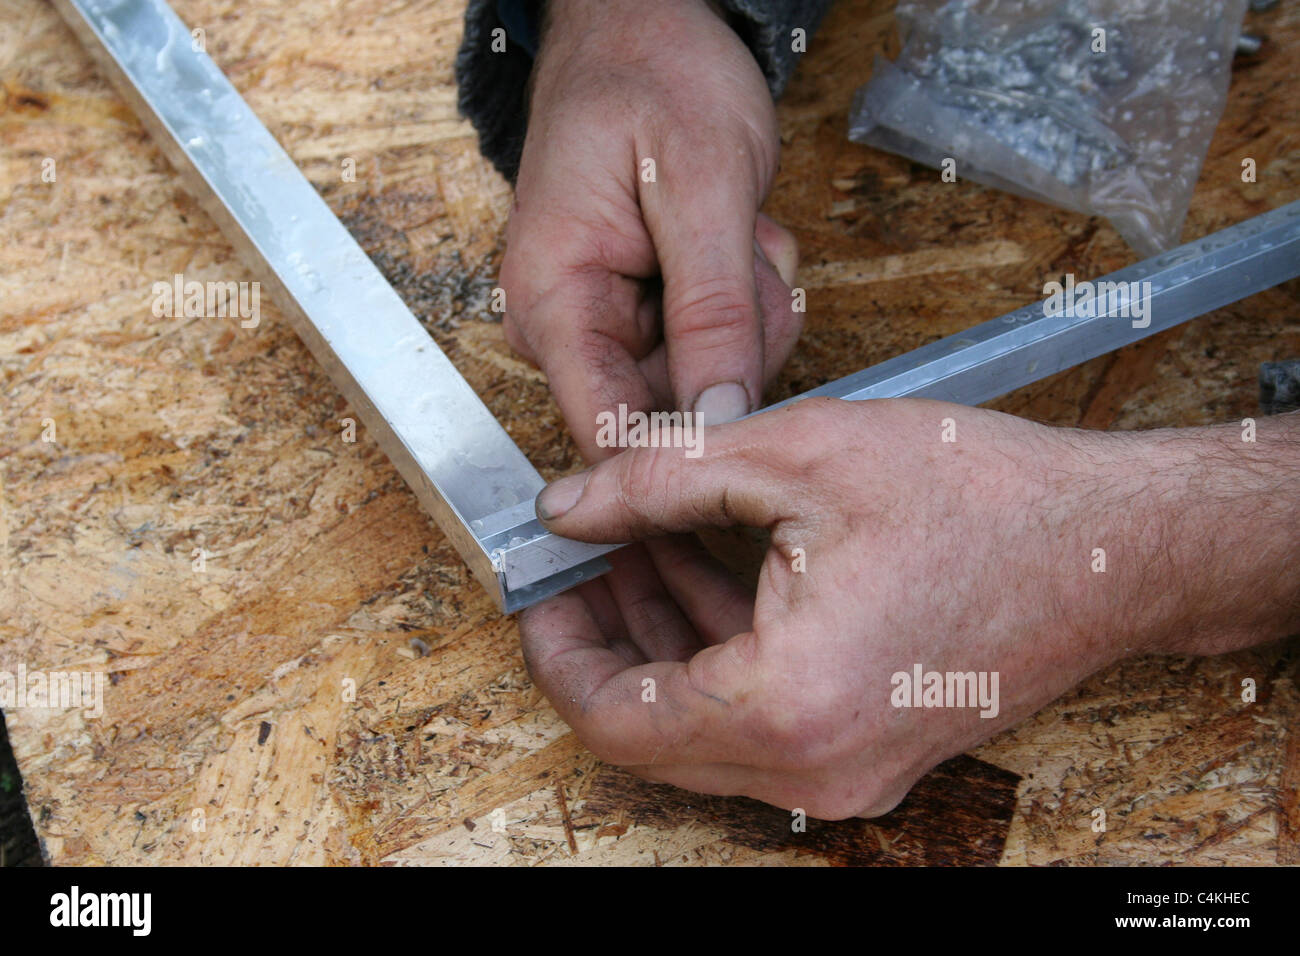 Gardener putting together a glass cold frame. Stock Photo